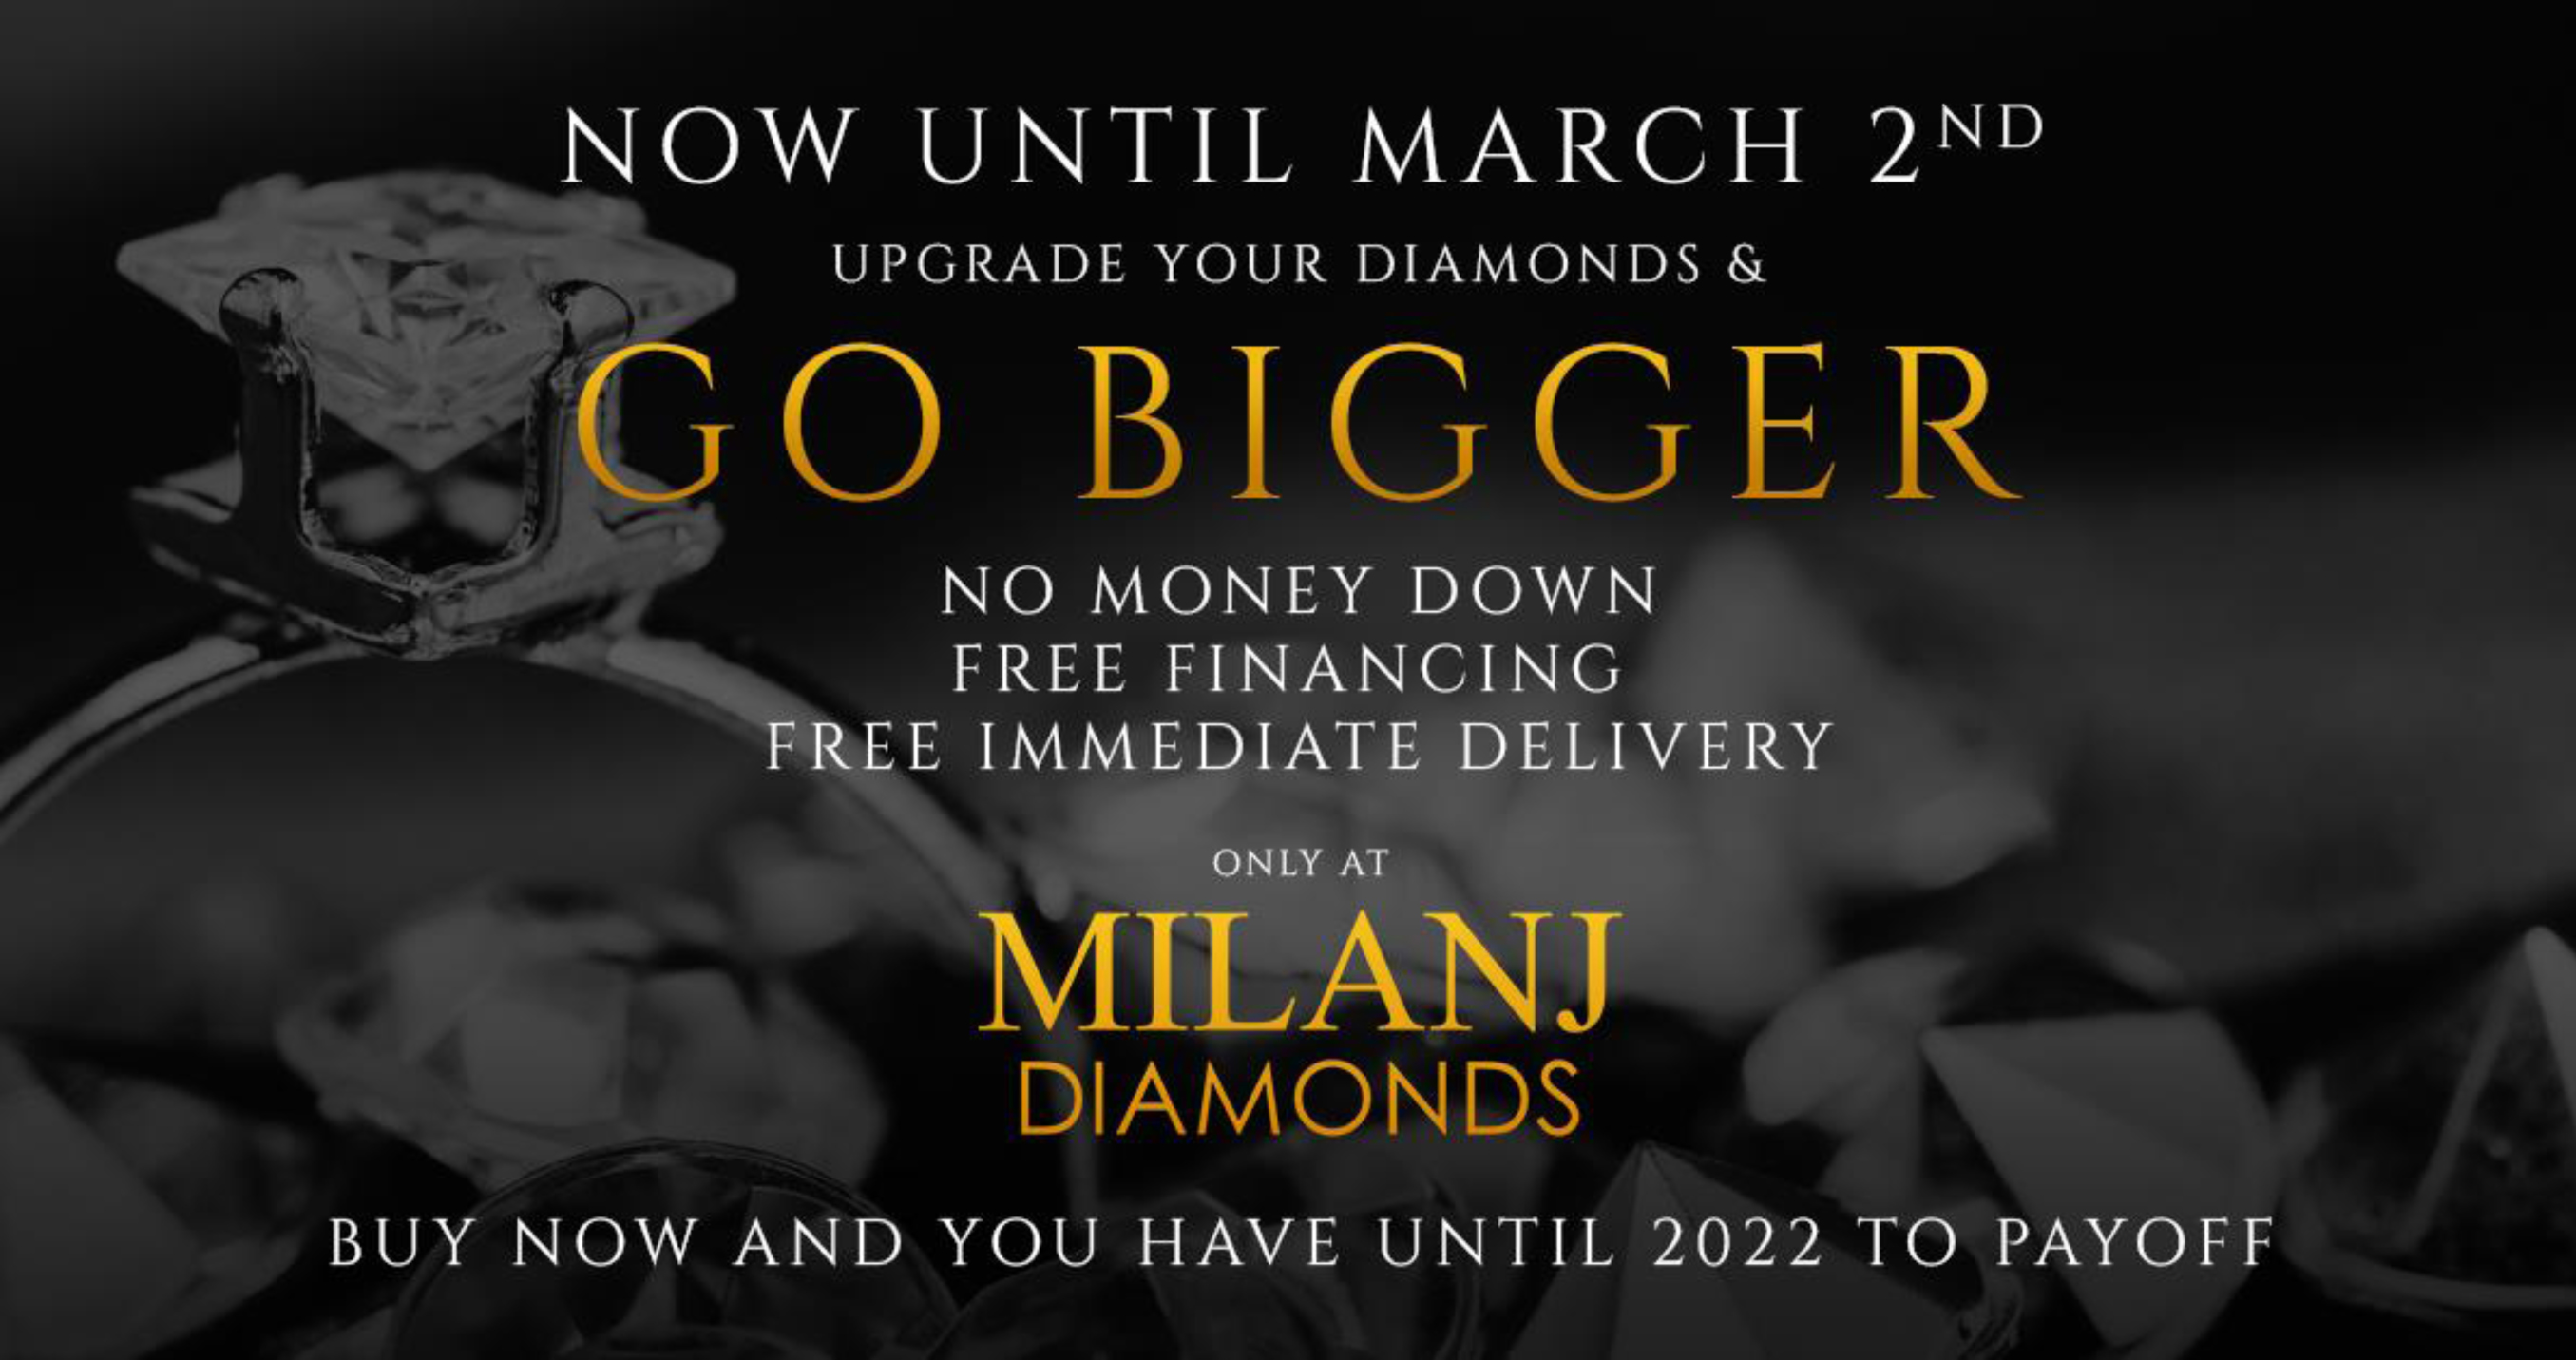 Until March 2nd, Diamond Lovers Have a Unique Opportunity to Upsize With MILANJ Diamonds